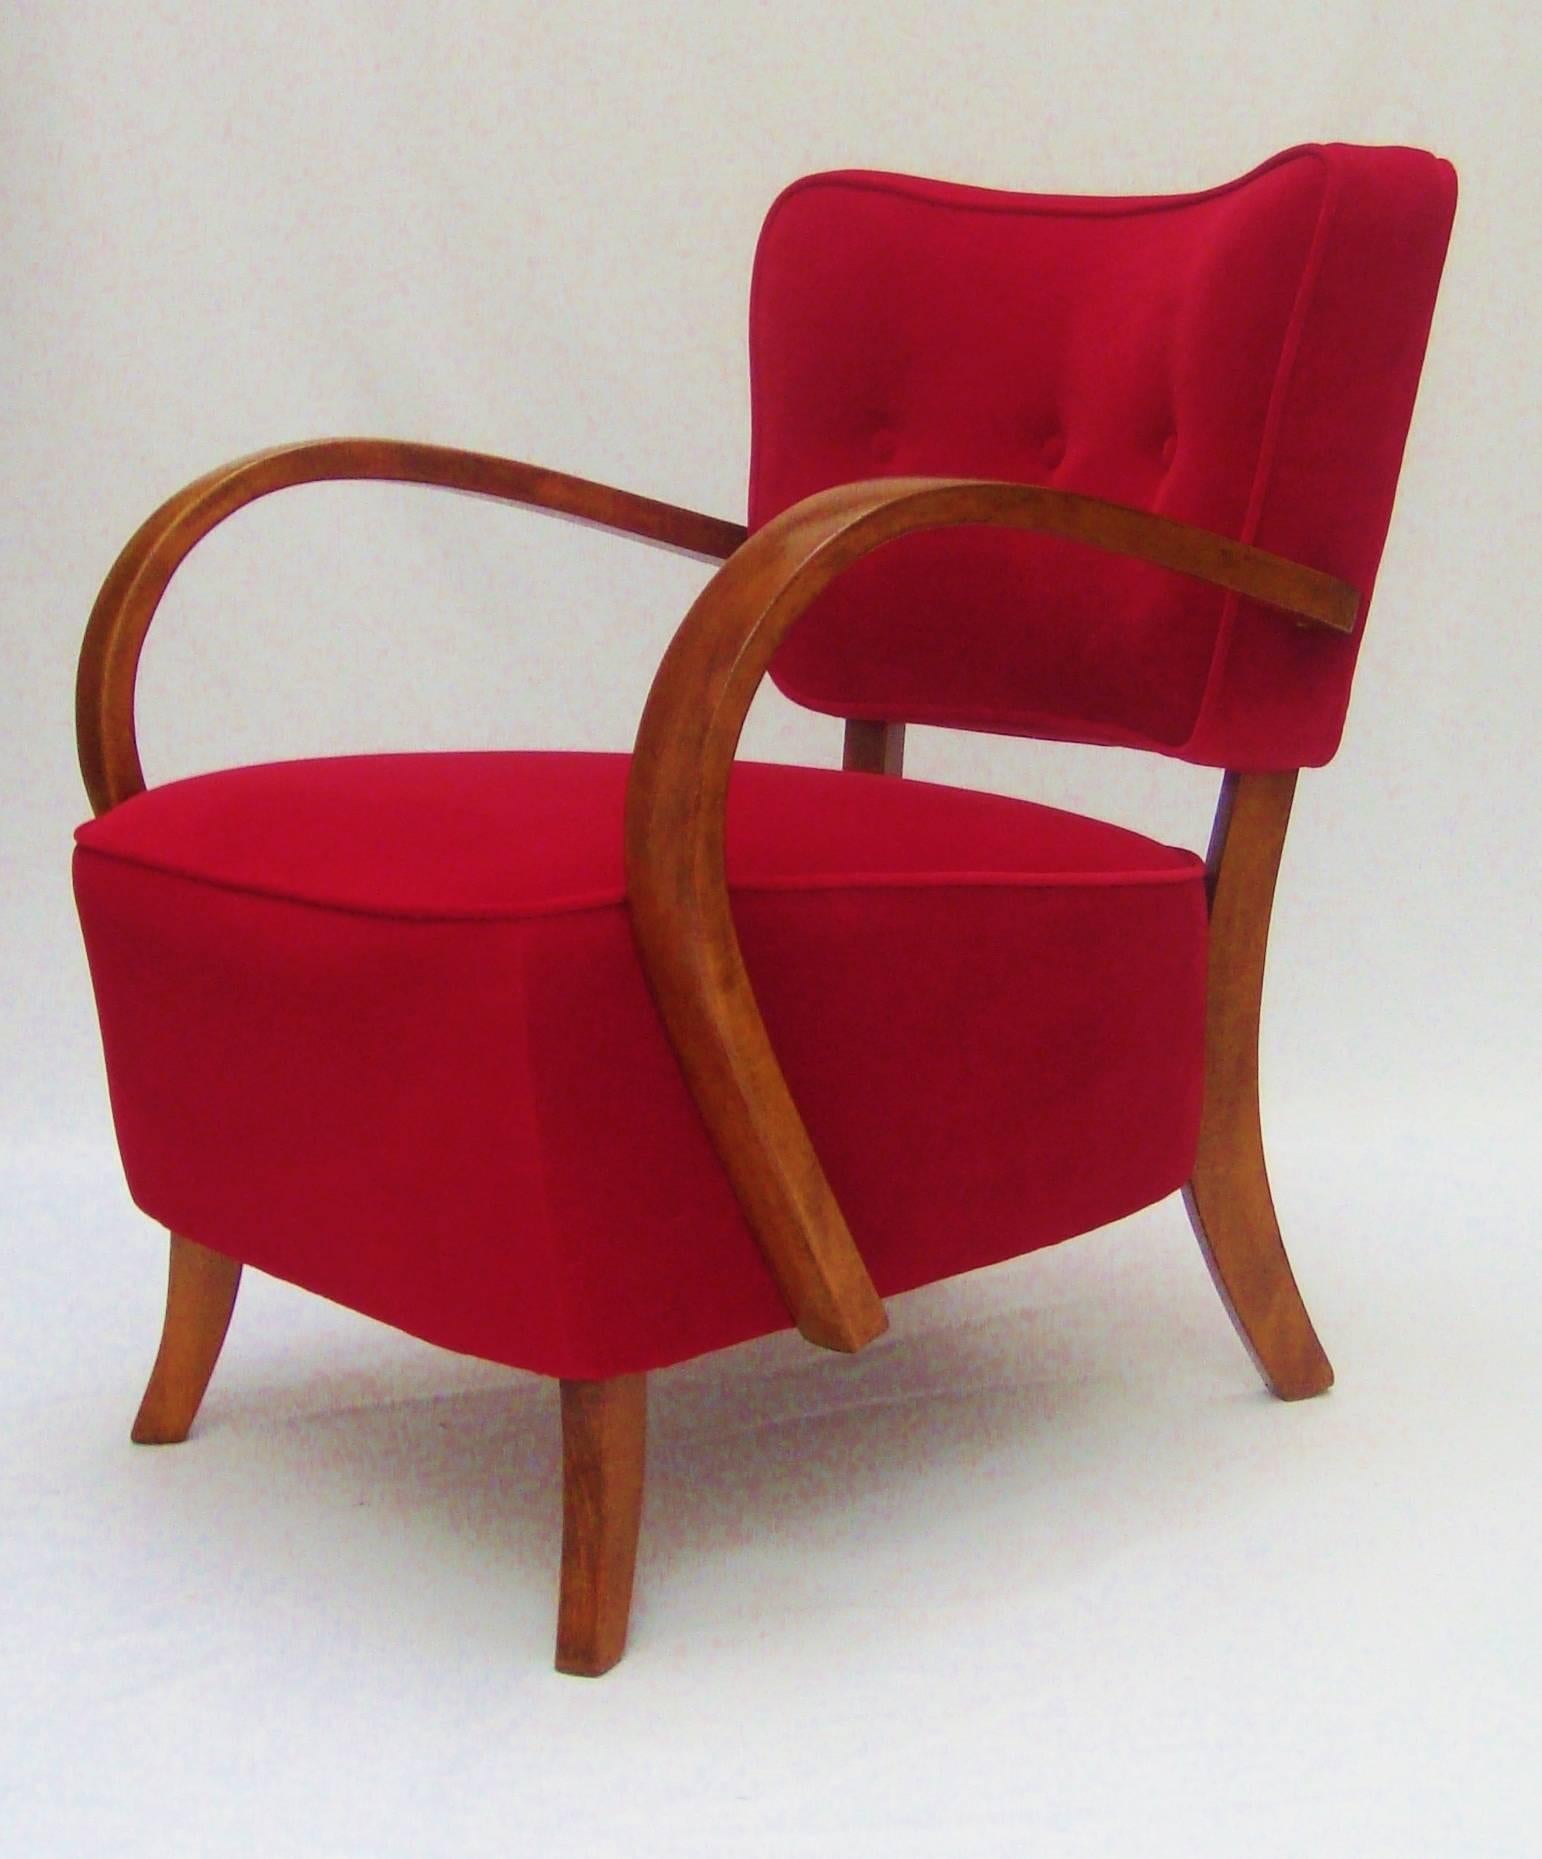 Czech Pair of 1940s Armchairs Designed by Jindrich Halabala